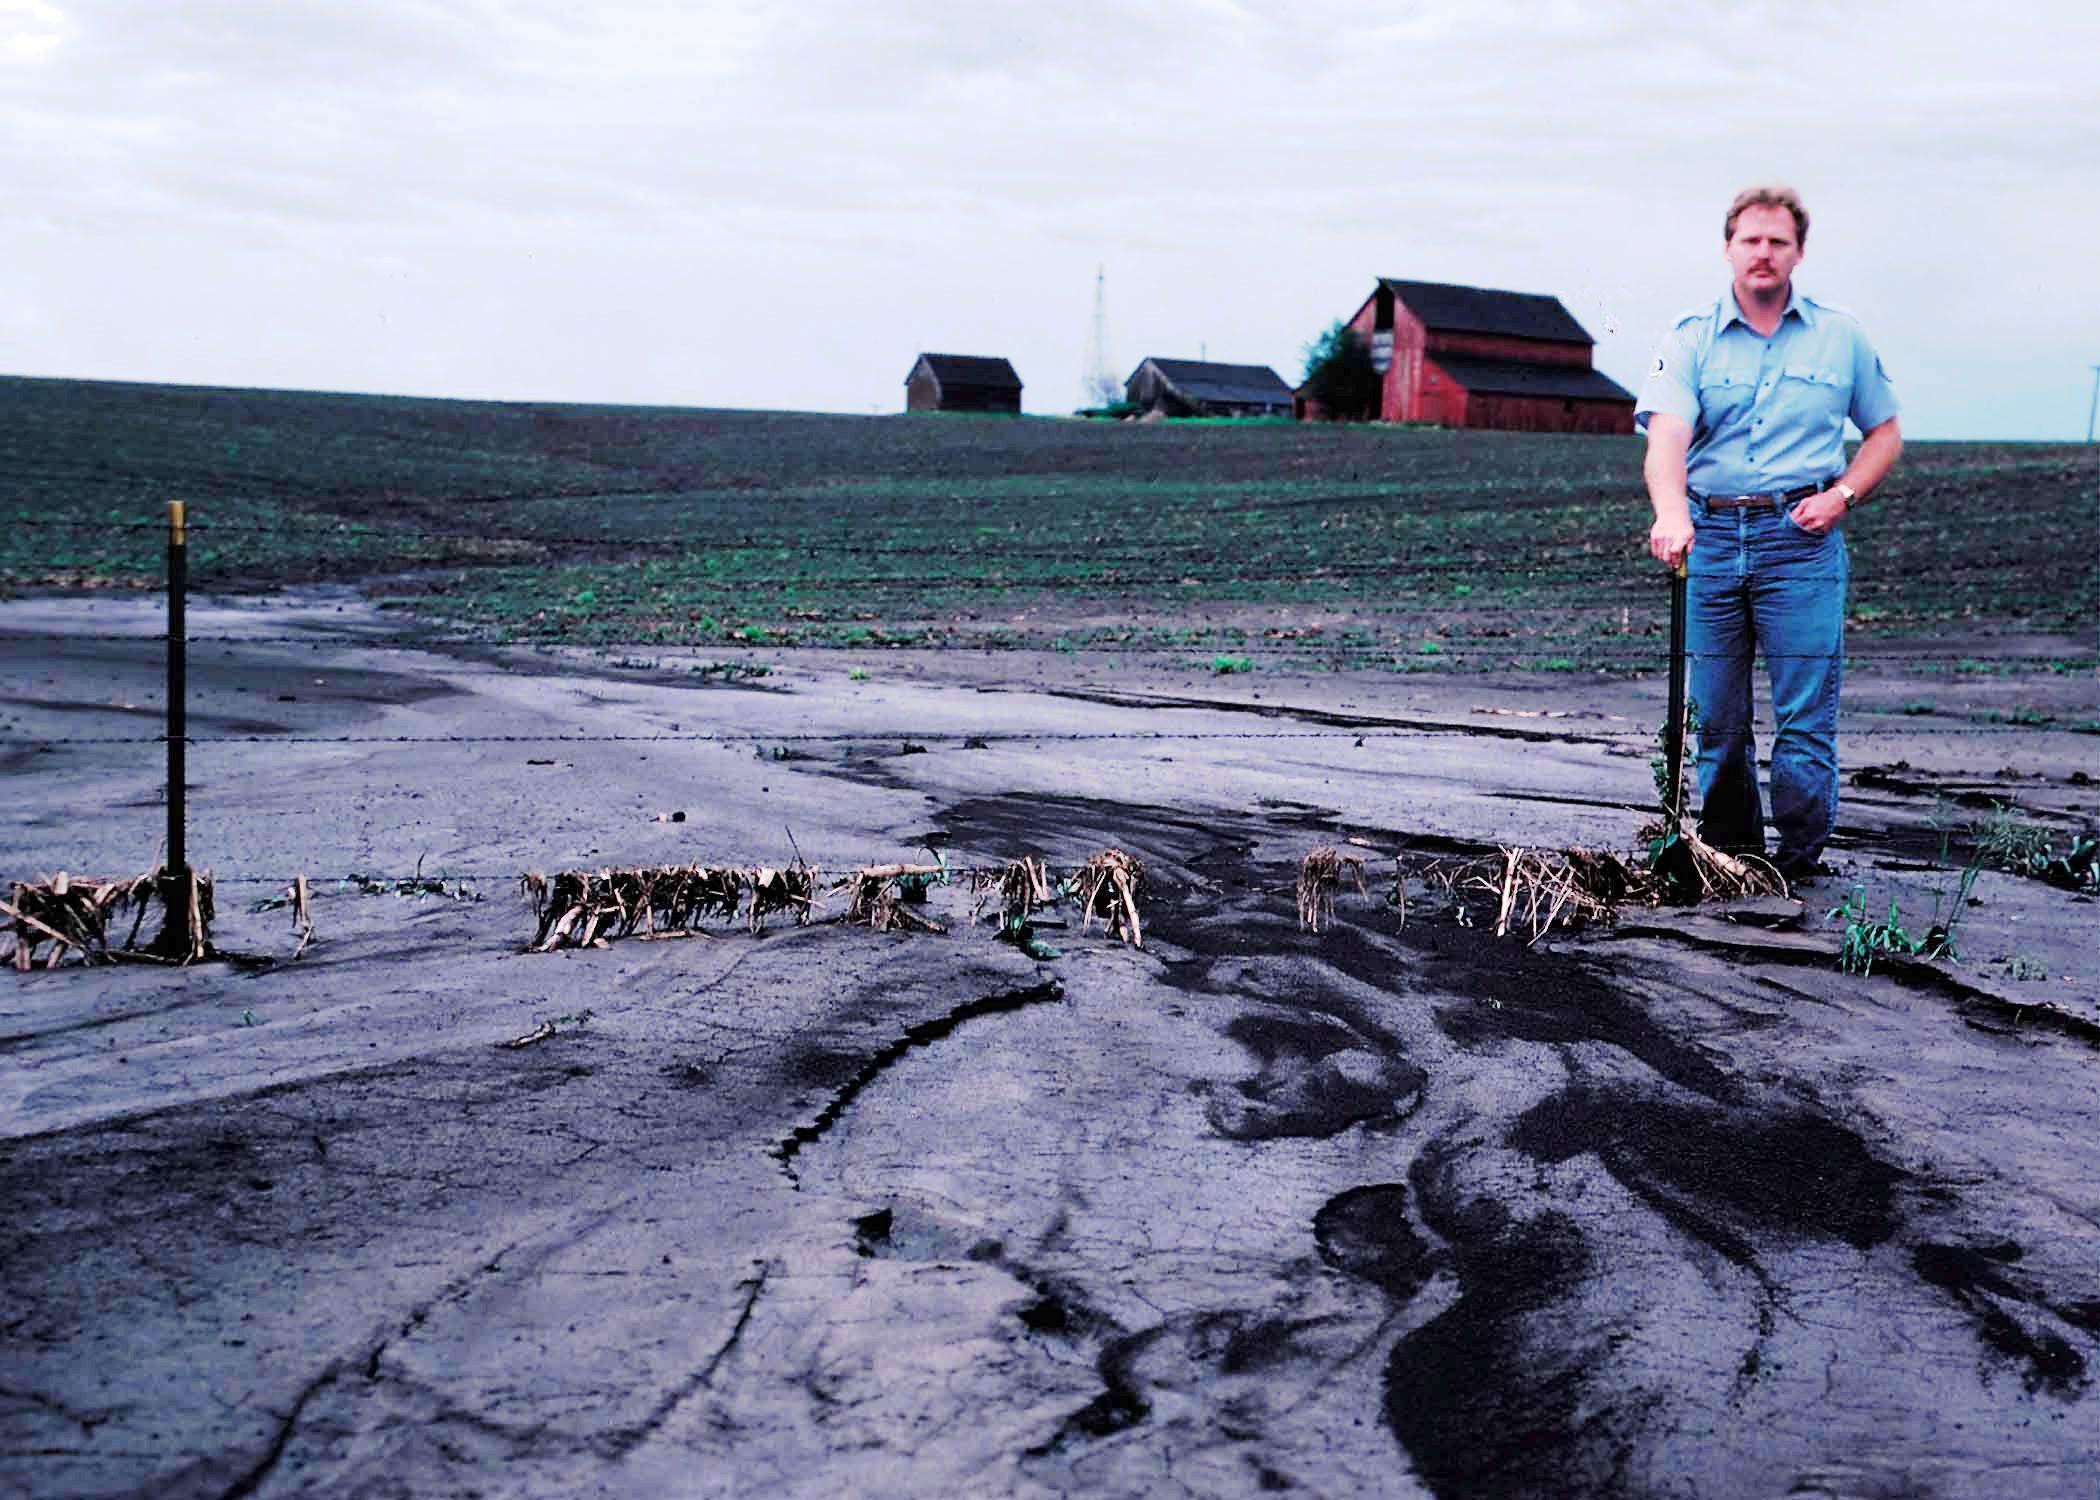 Man standing near sediment coming from severely eroded crop field.